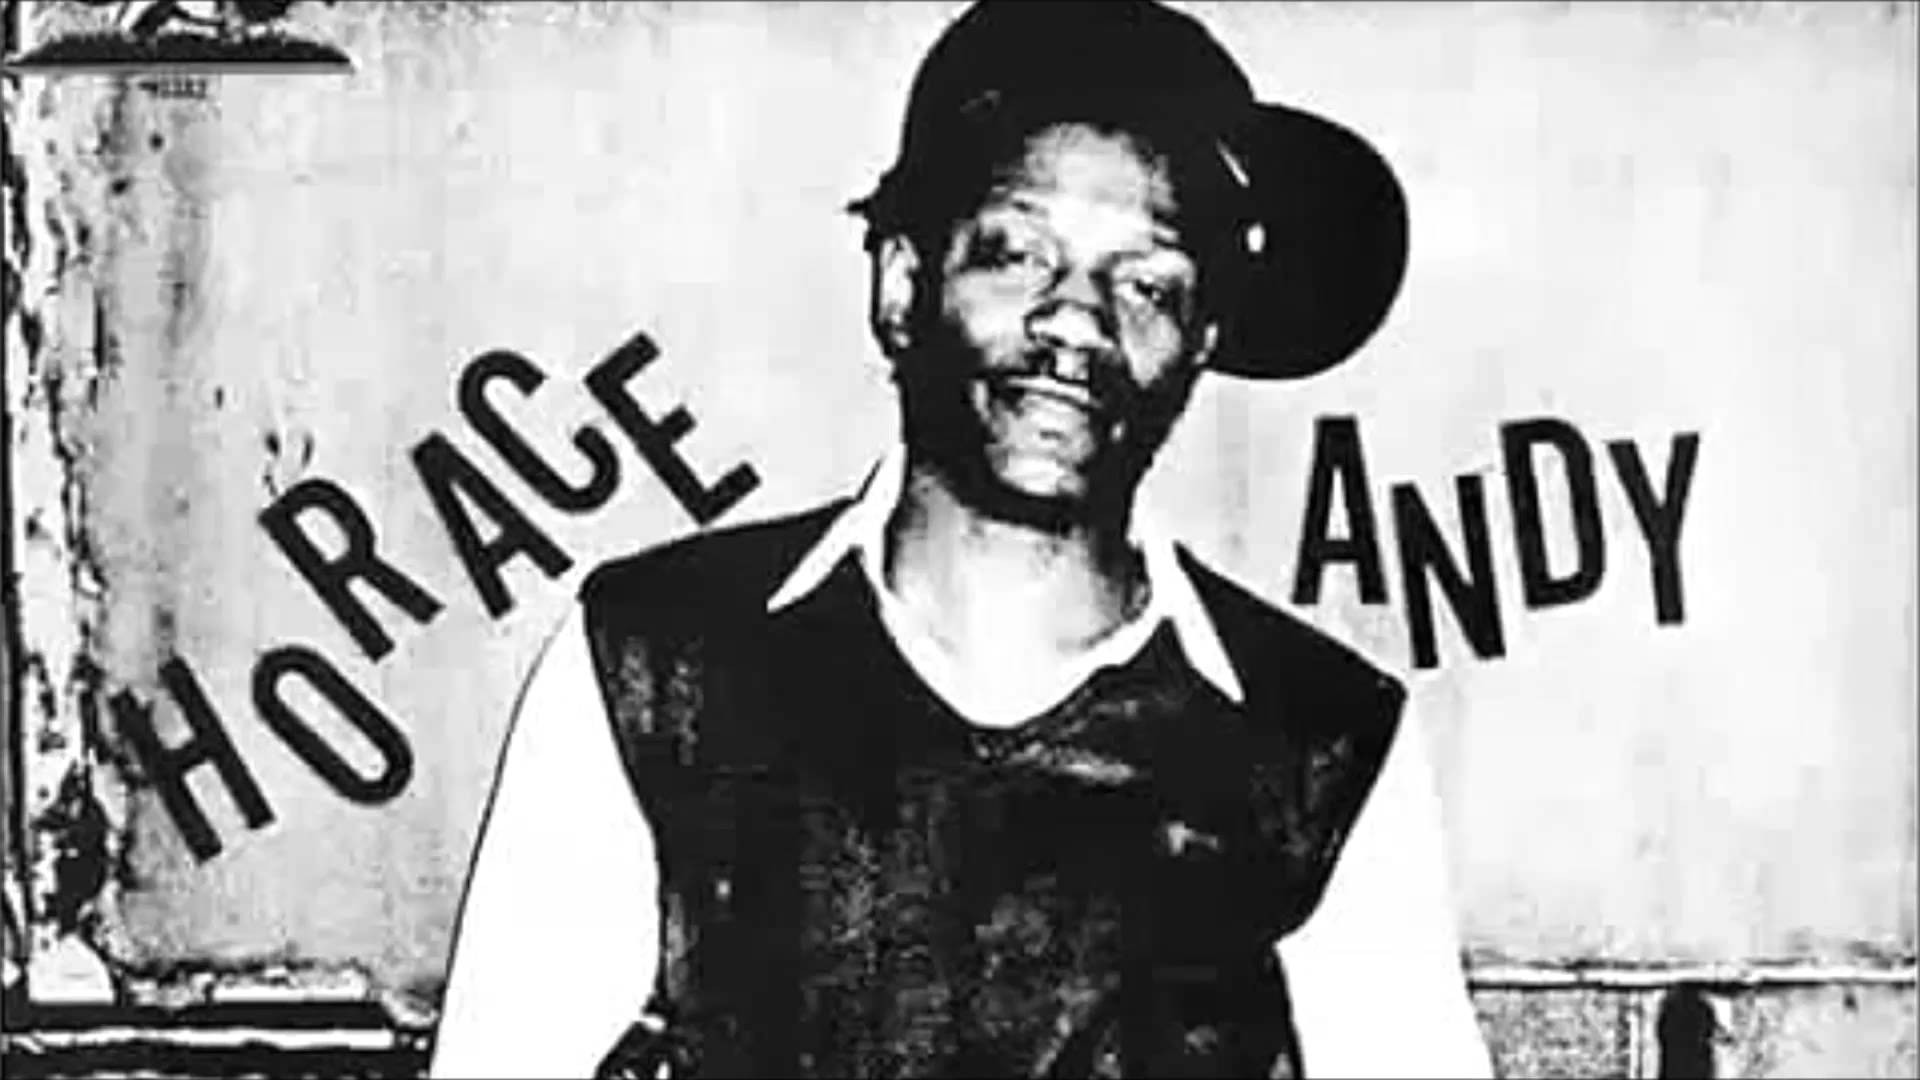 Horace Andy #26